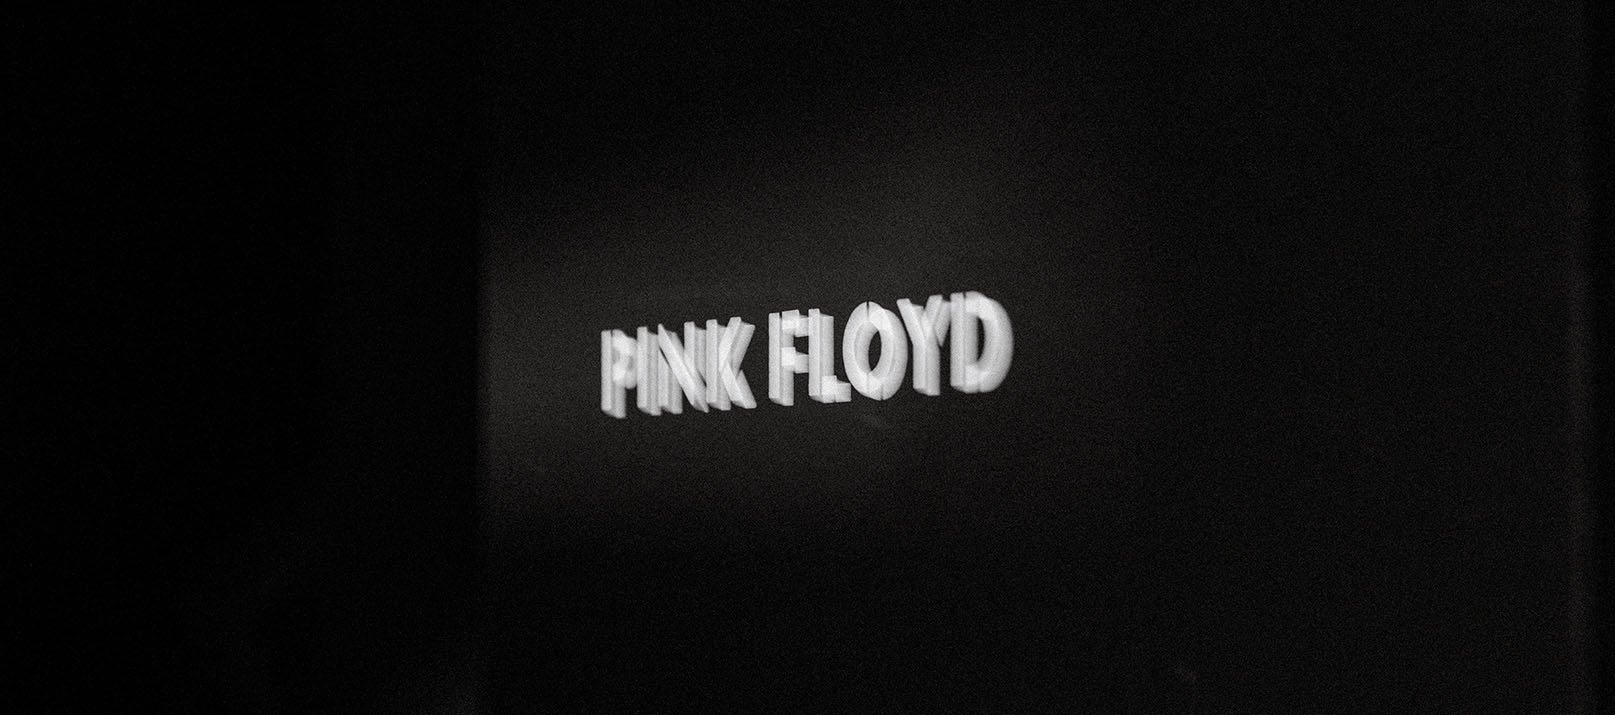 The Pink Floyd Exhibition